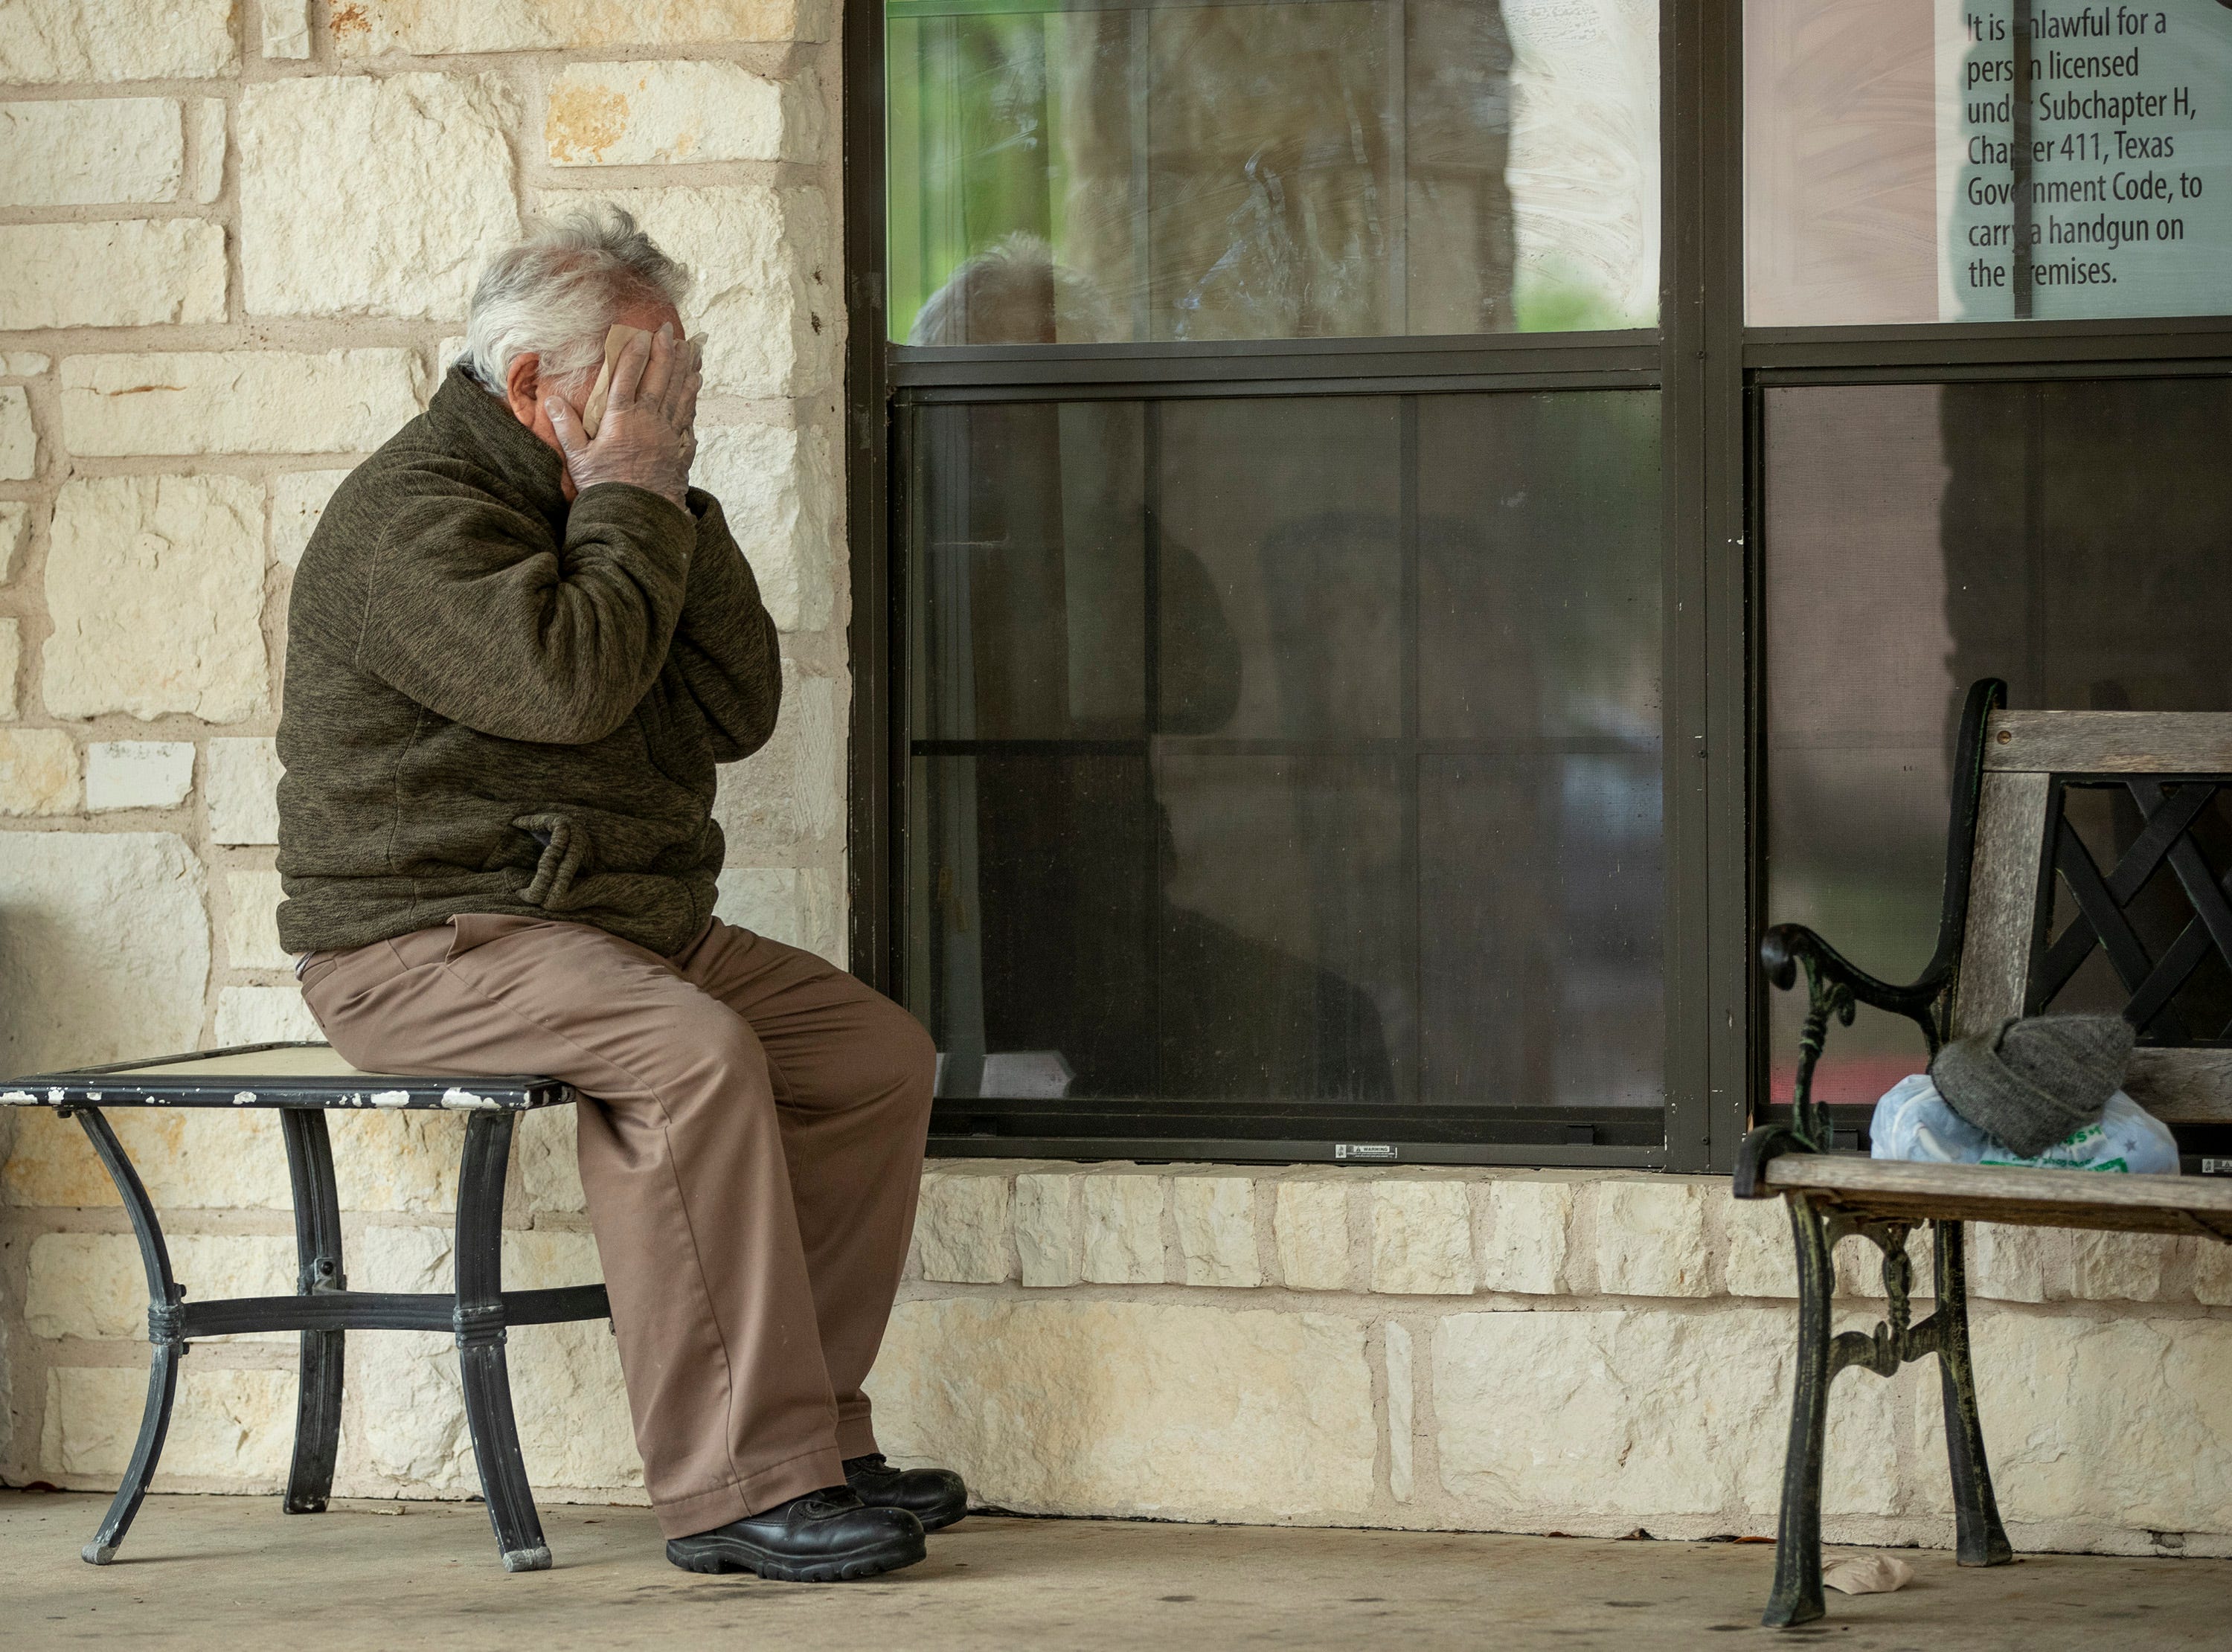 Gusto Monterrosa cries after talking through a window with his daughter who lives at Park Bend Health Center in North Austin on March 22, 2020 on amid the coronavirus pandemic.